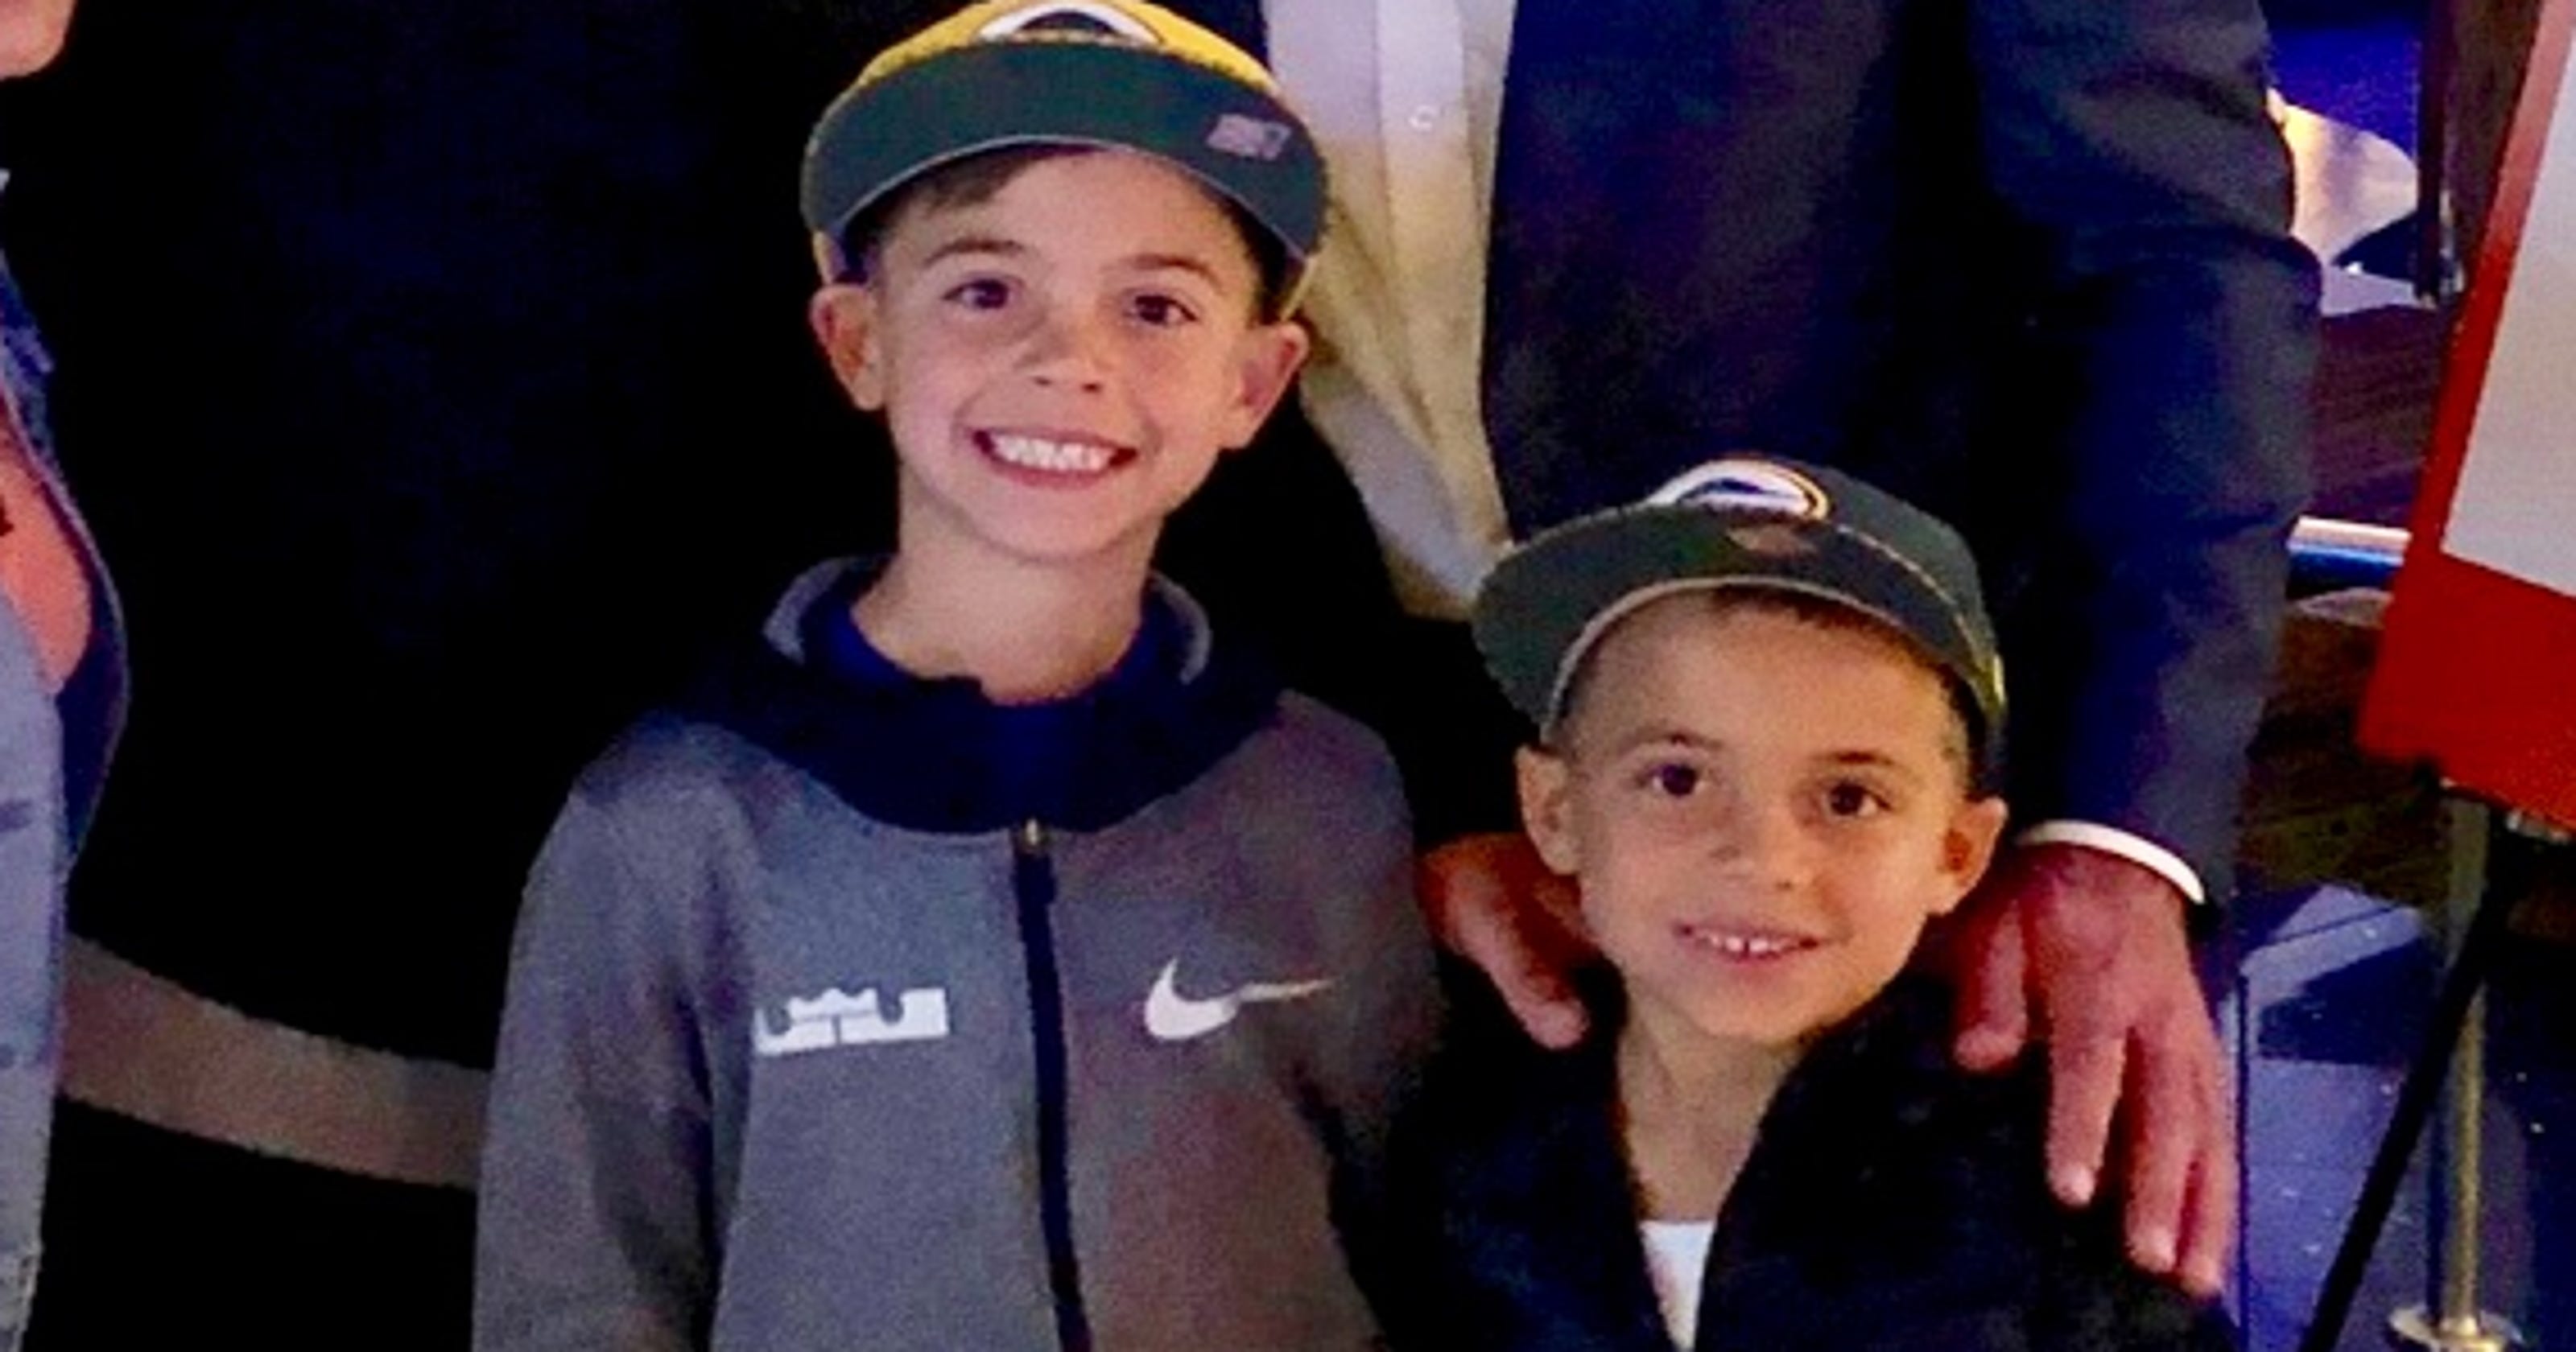 Aaron Rodgers Makes The Day Of 2 Packers Fan Brothers From